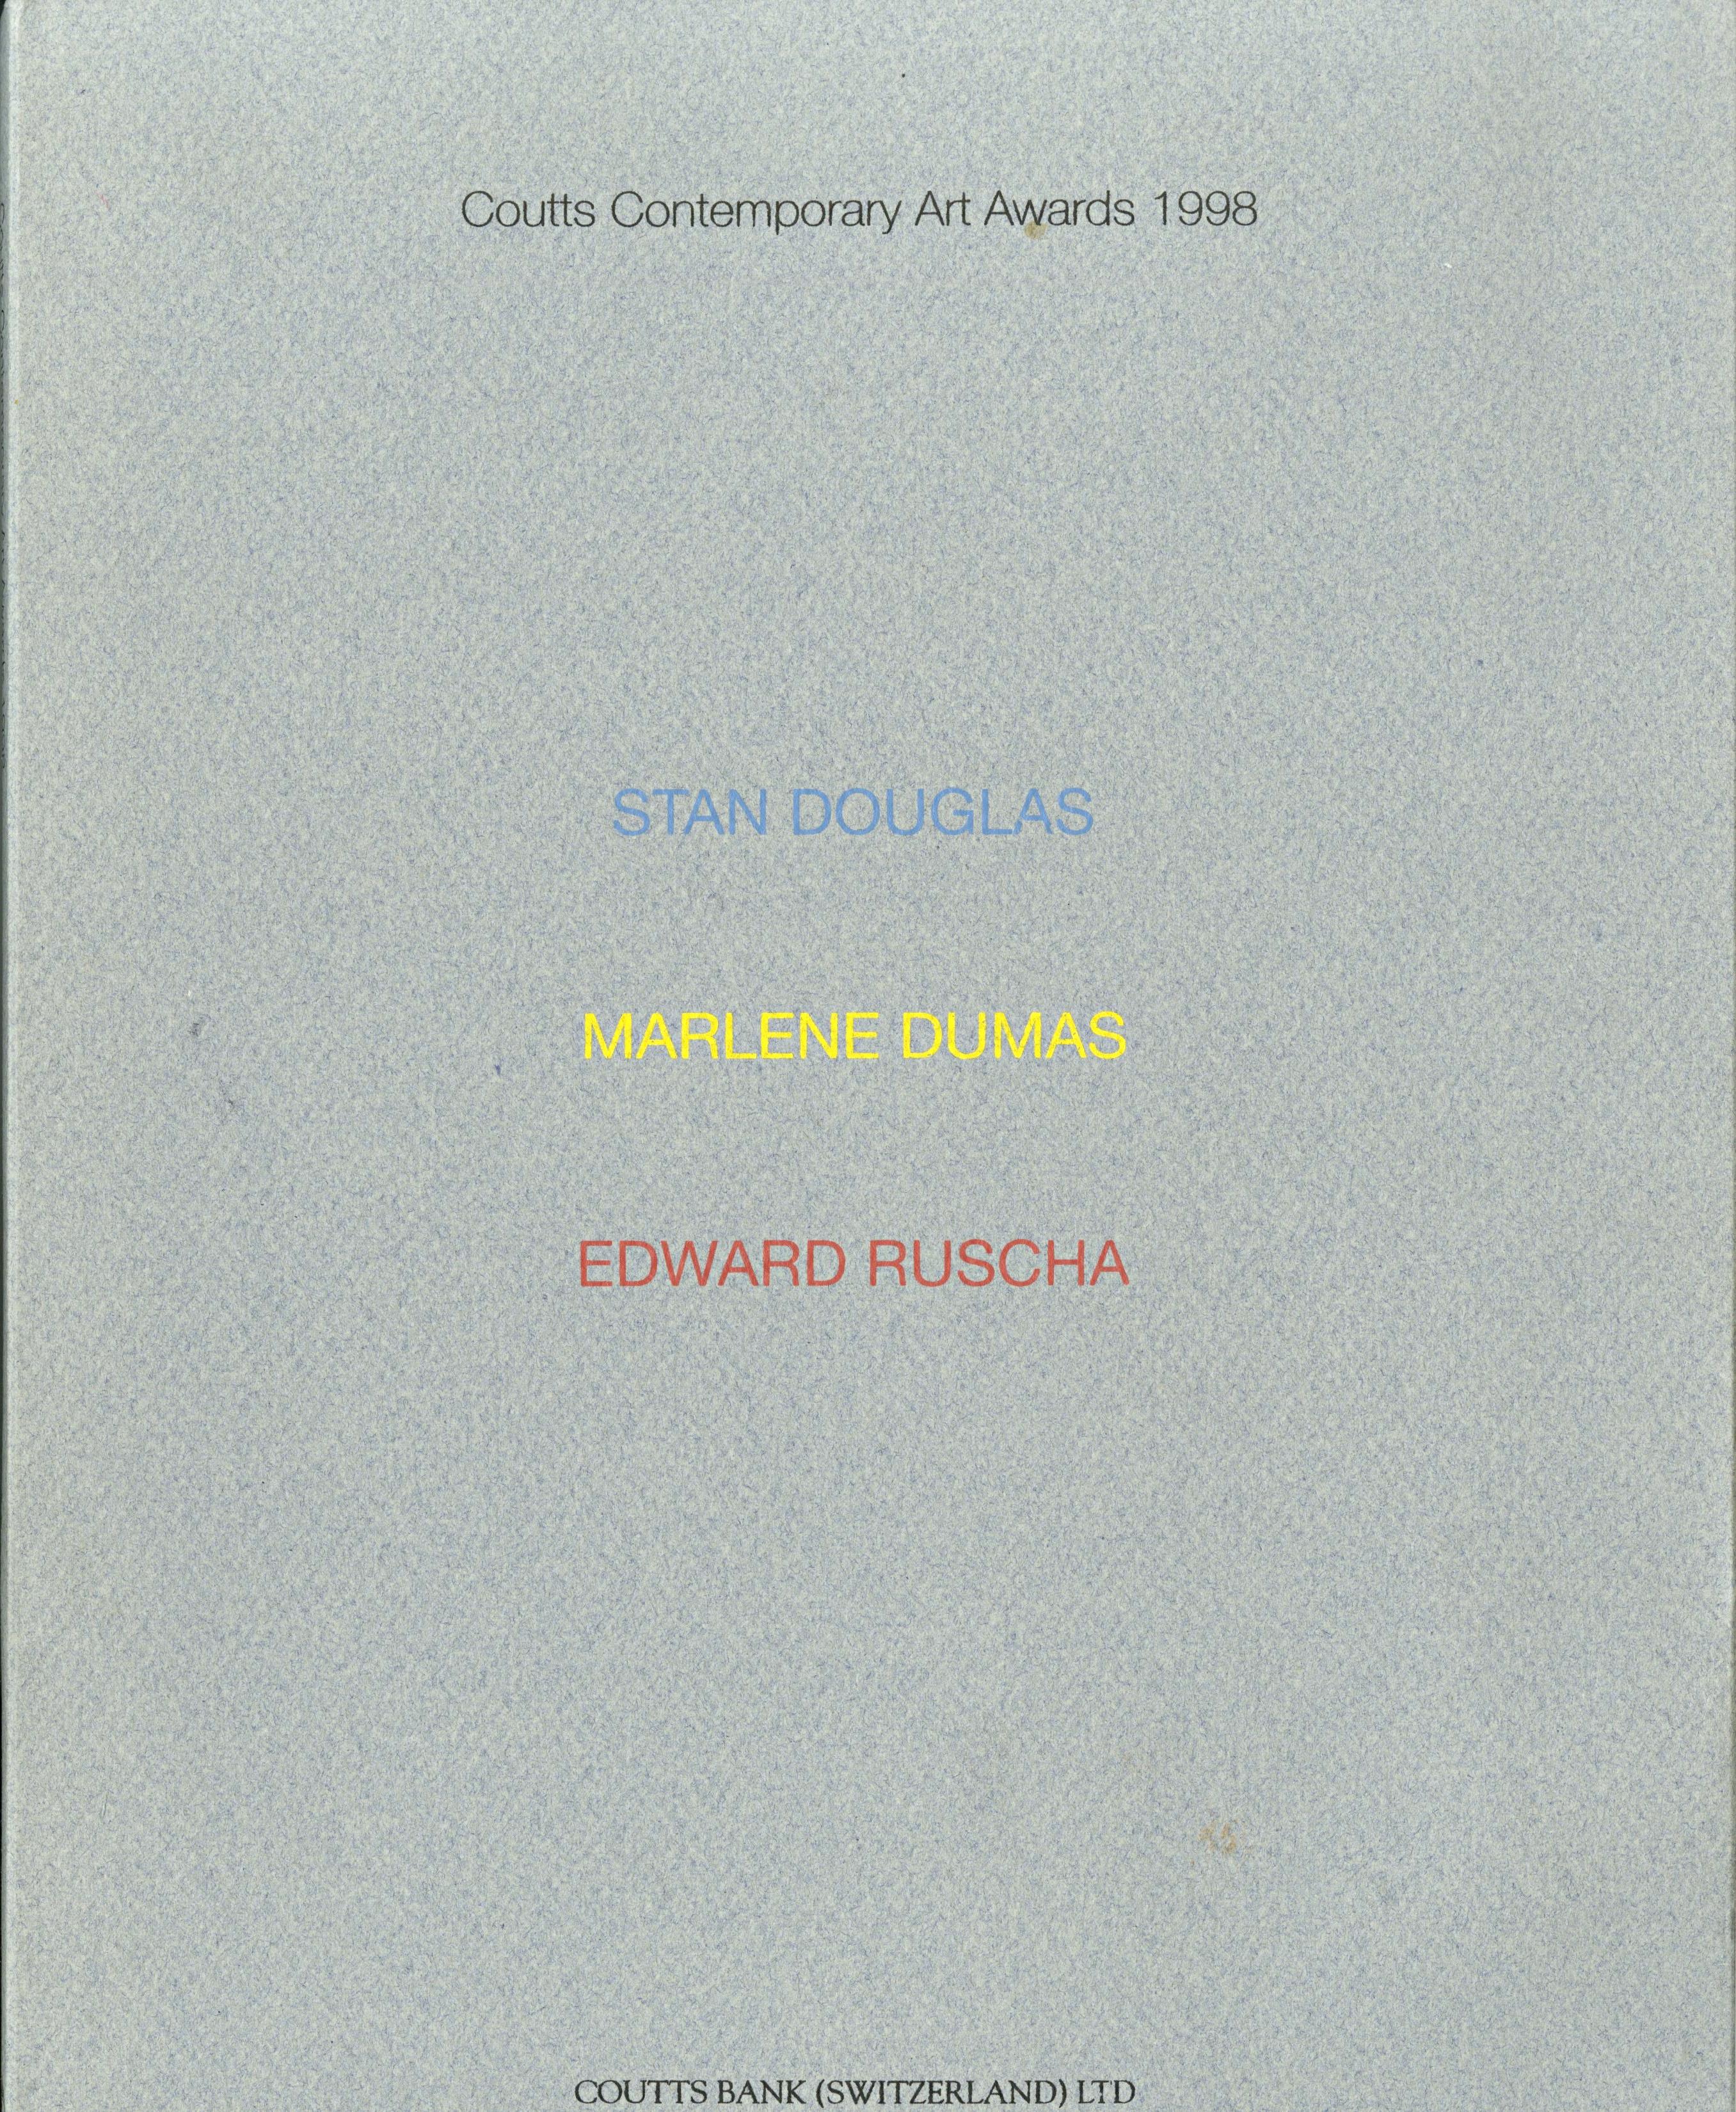 Coutts Contemporary Art Awards Book (Hand Signed by Ruscha, Dumas and Douglas) For Sale 2